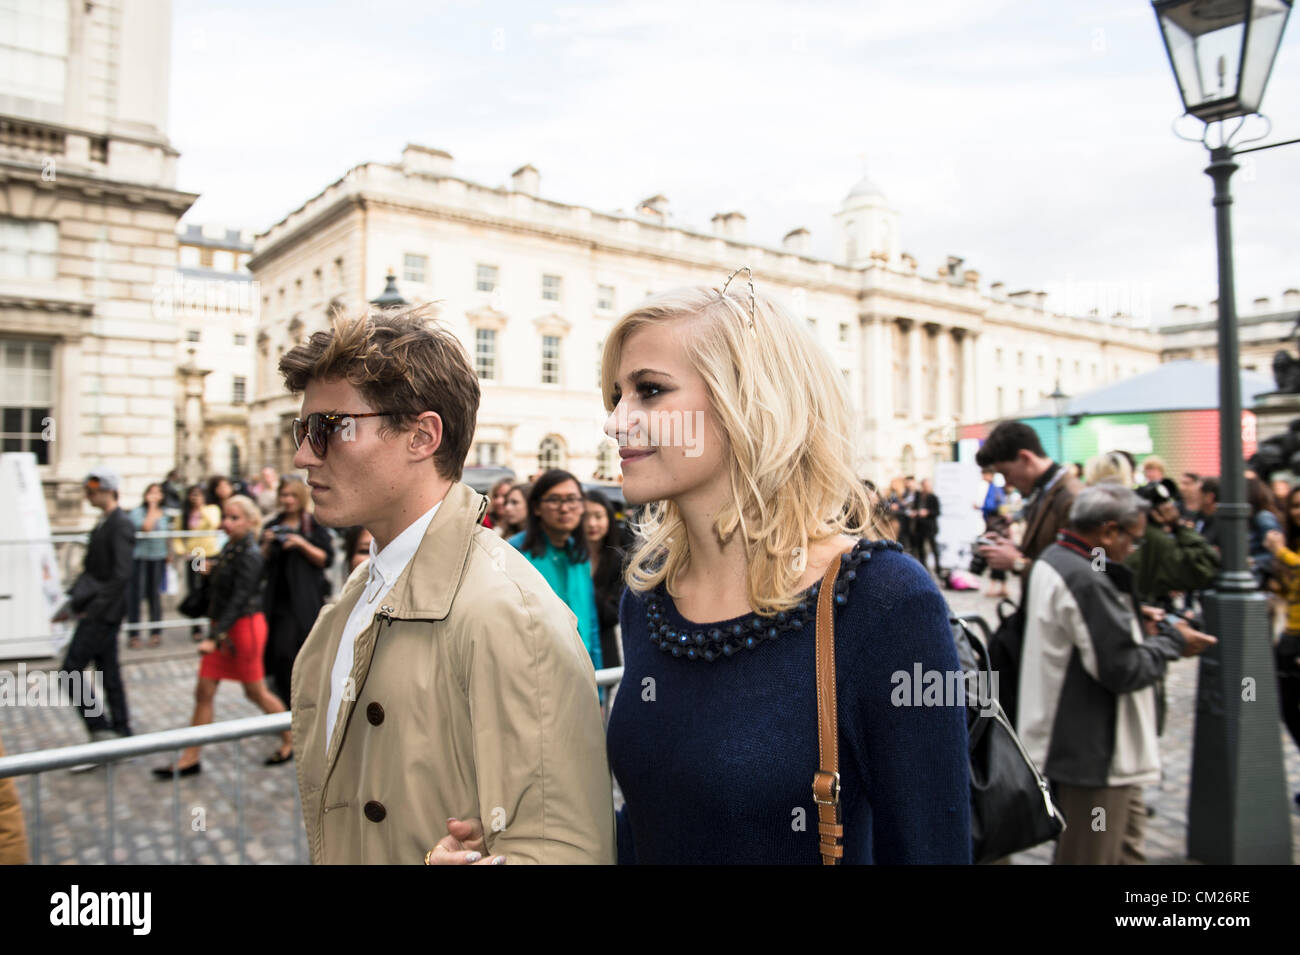 17th September 2012, UK. London Fashion Week at Somerset House, London. The famous and fashionable attend the shows or purely to hang out in the courtyard. Singer, Pixie Lott leaves with male friend after the show. Stock Photo